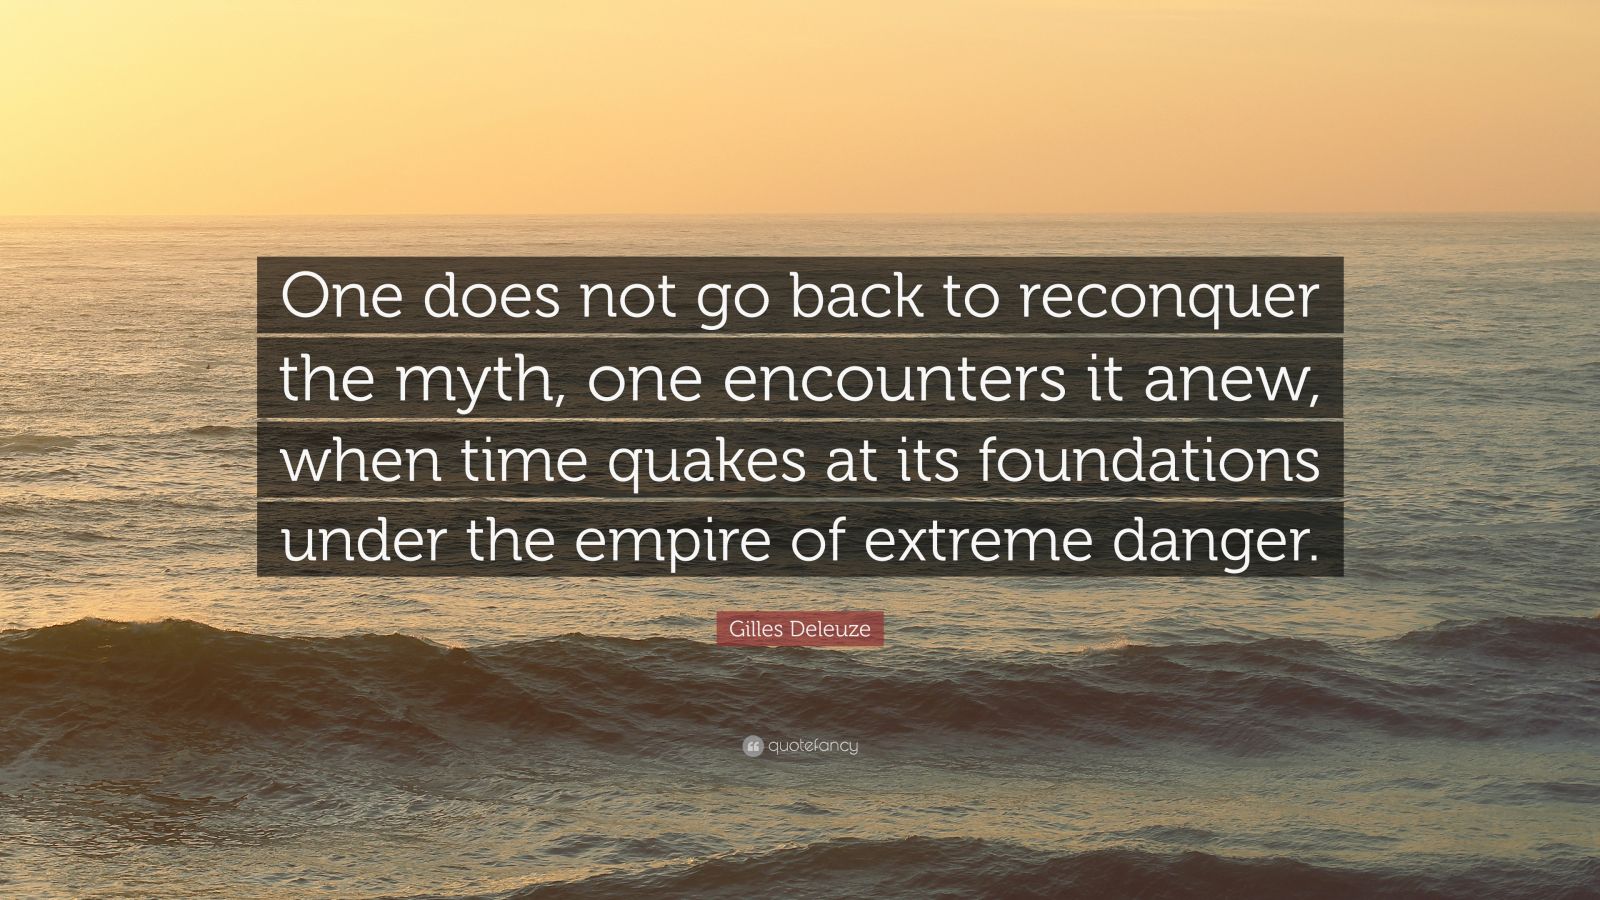 Gilles Deleuze Quote: “One does not go back to reconquer the myth, one ...